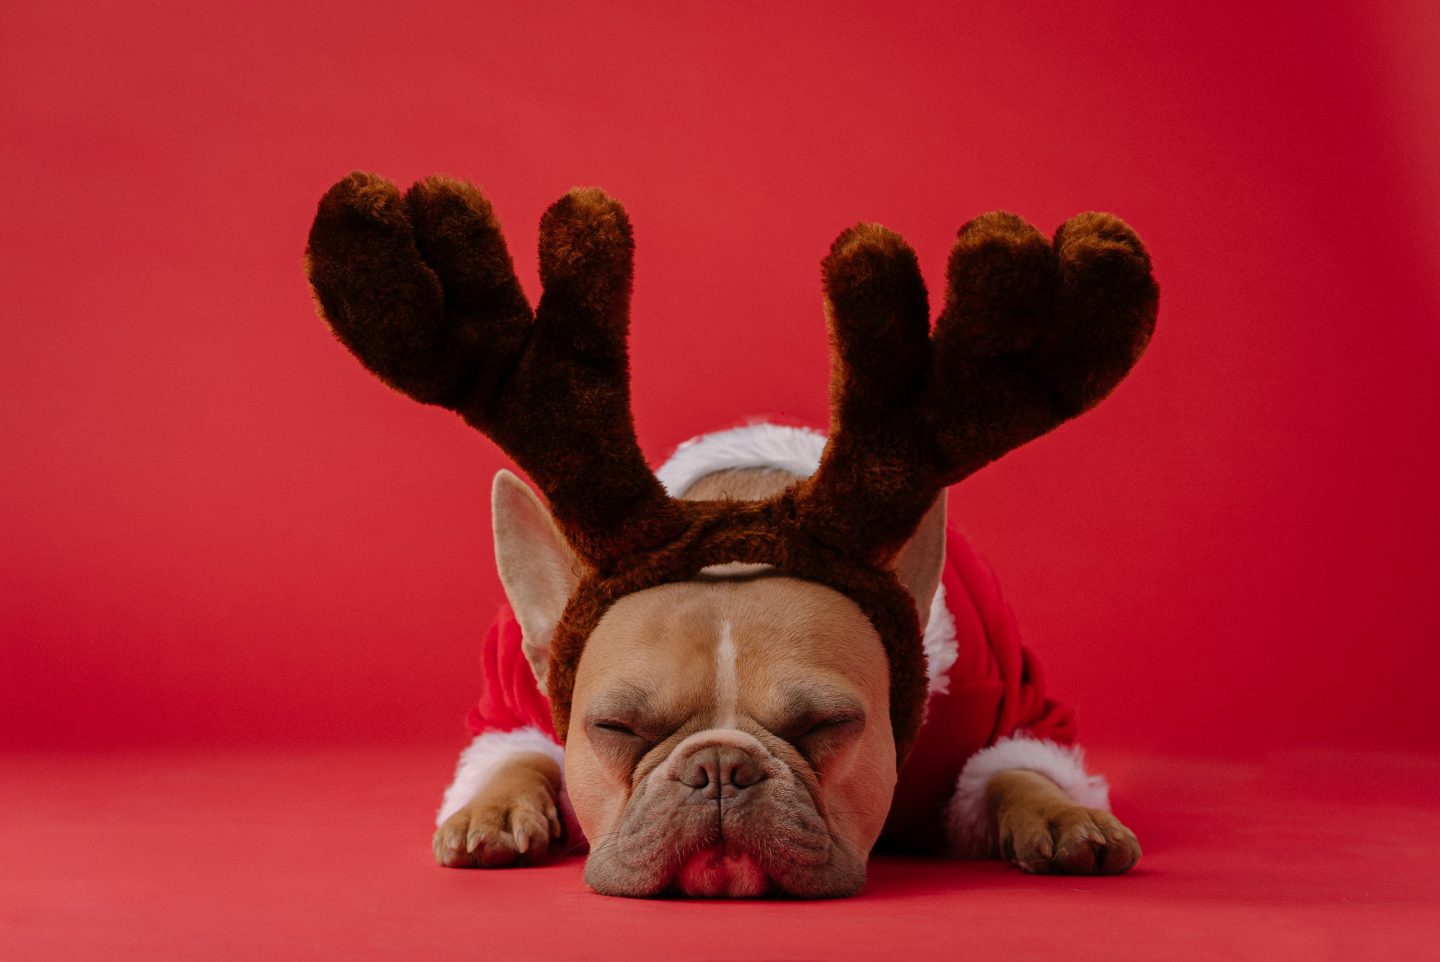 A photo of a dog in a Santa jumper and large fluffy Antlers. He looks grumpy as he sleeps. The background is red.